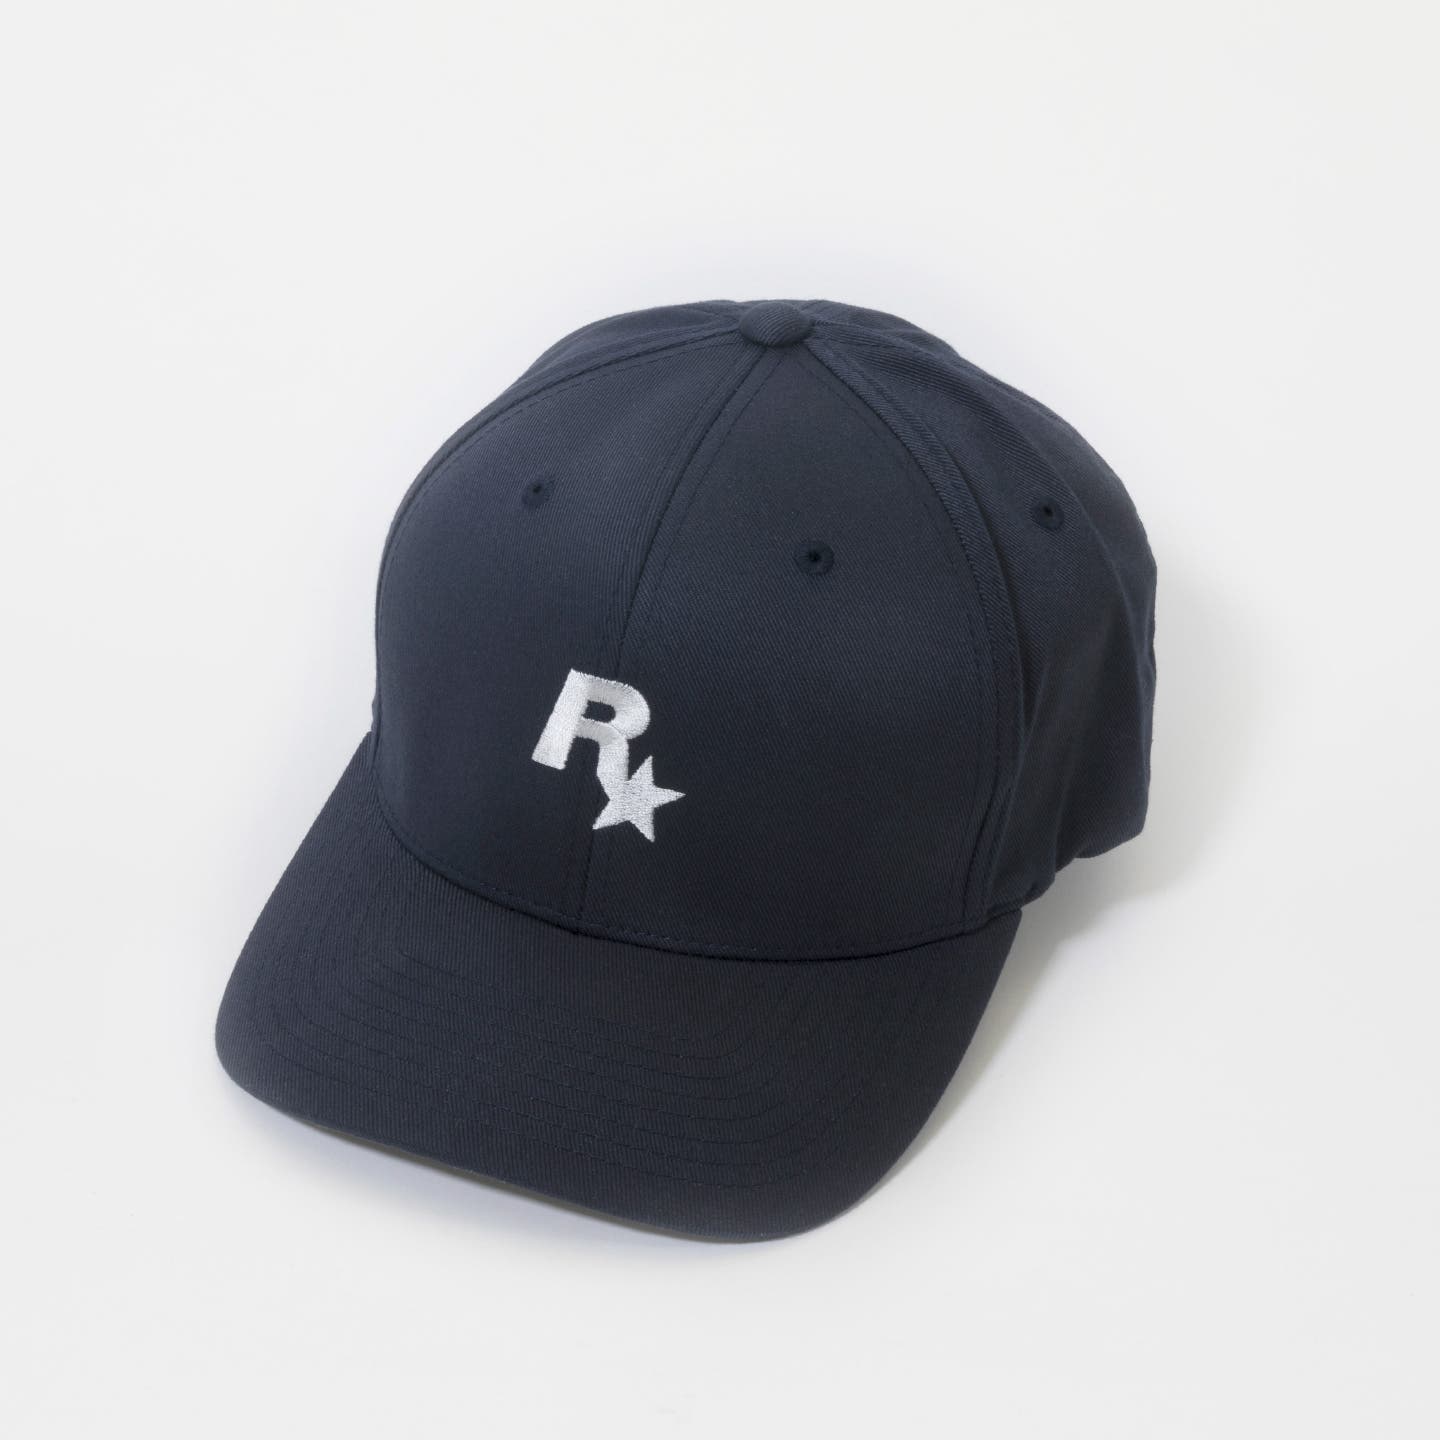 Rockstar Games on X: The classic Navy and White Rockstar Baseball Cap Now  back in stock at the Rockstar Warehouse while supplies last:    / X